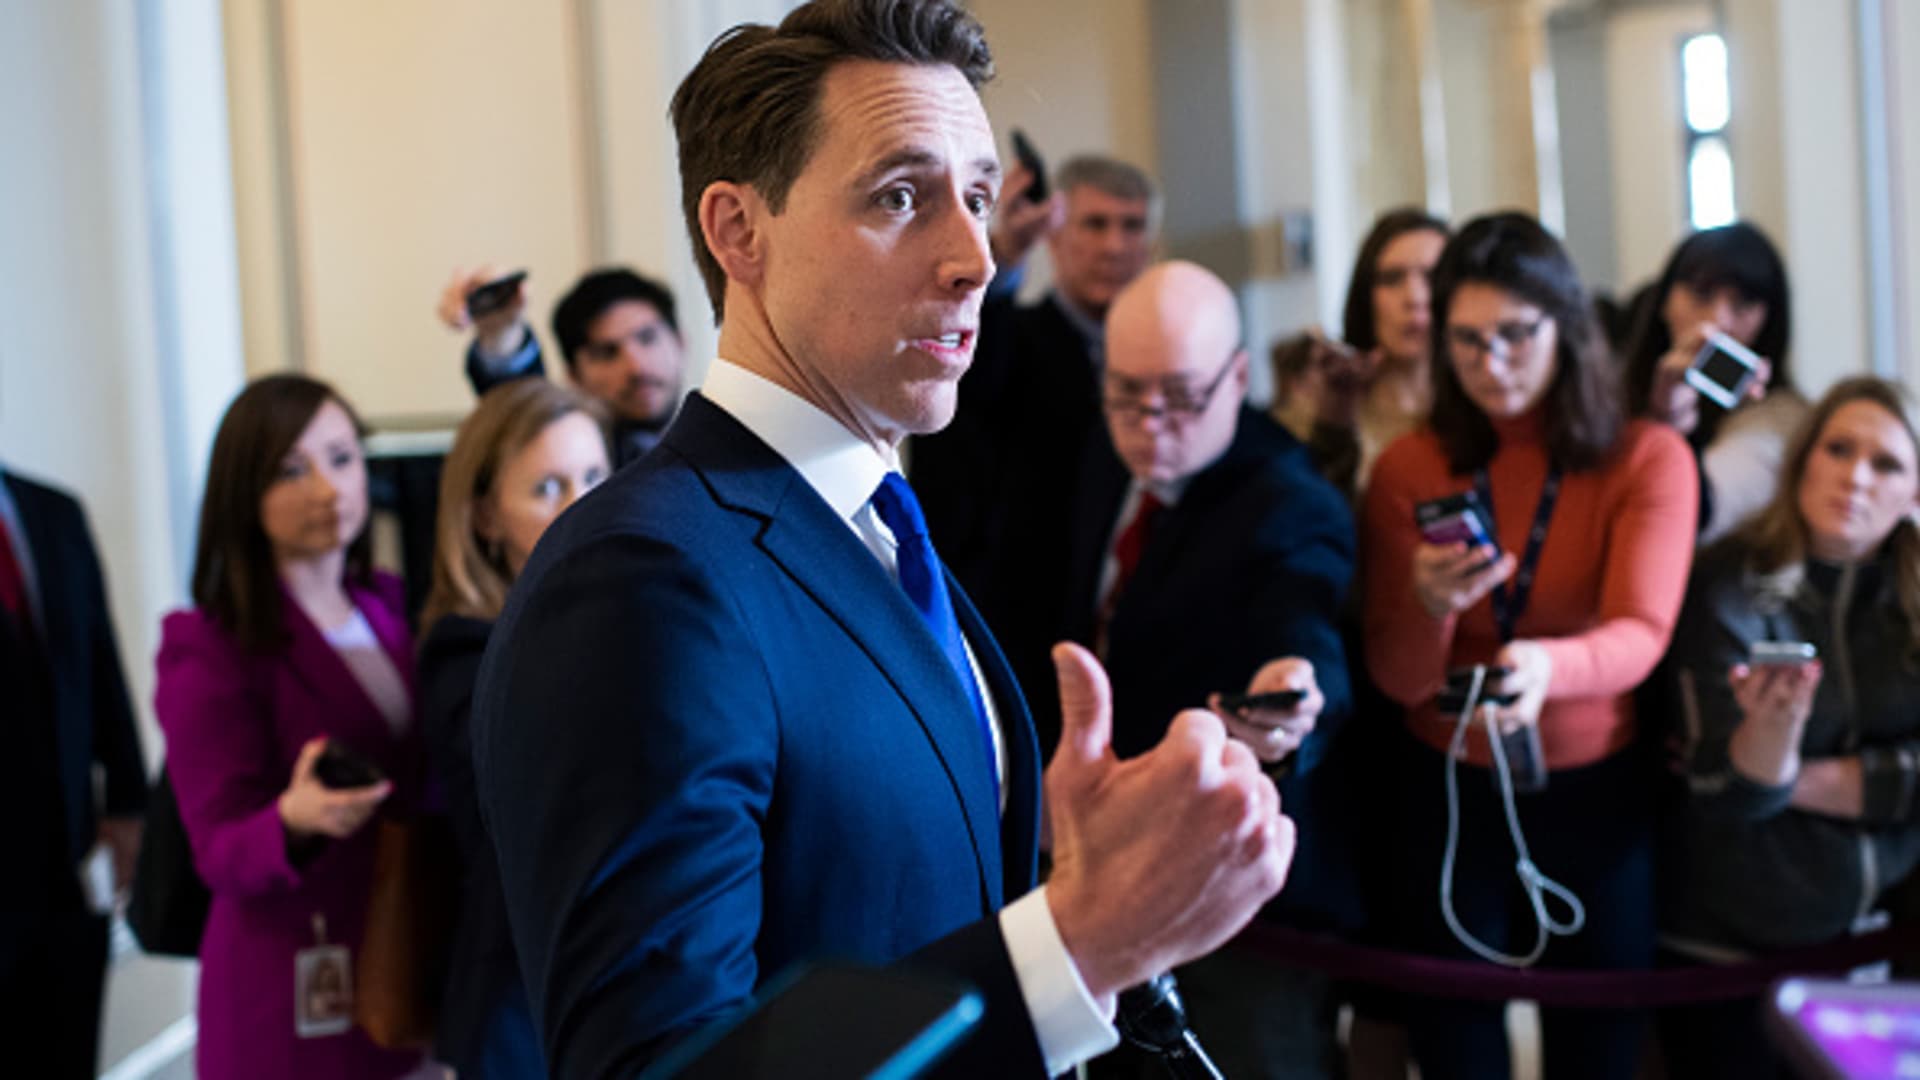 Sen. Josh Hawley, R-Mo., talks with reporters after the Senate Republican Policy luncheon in Russell Building on Tuesday, March 17, 2020.